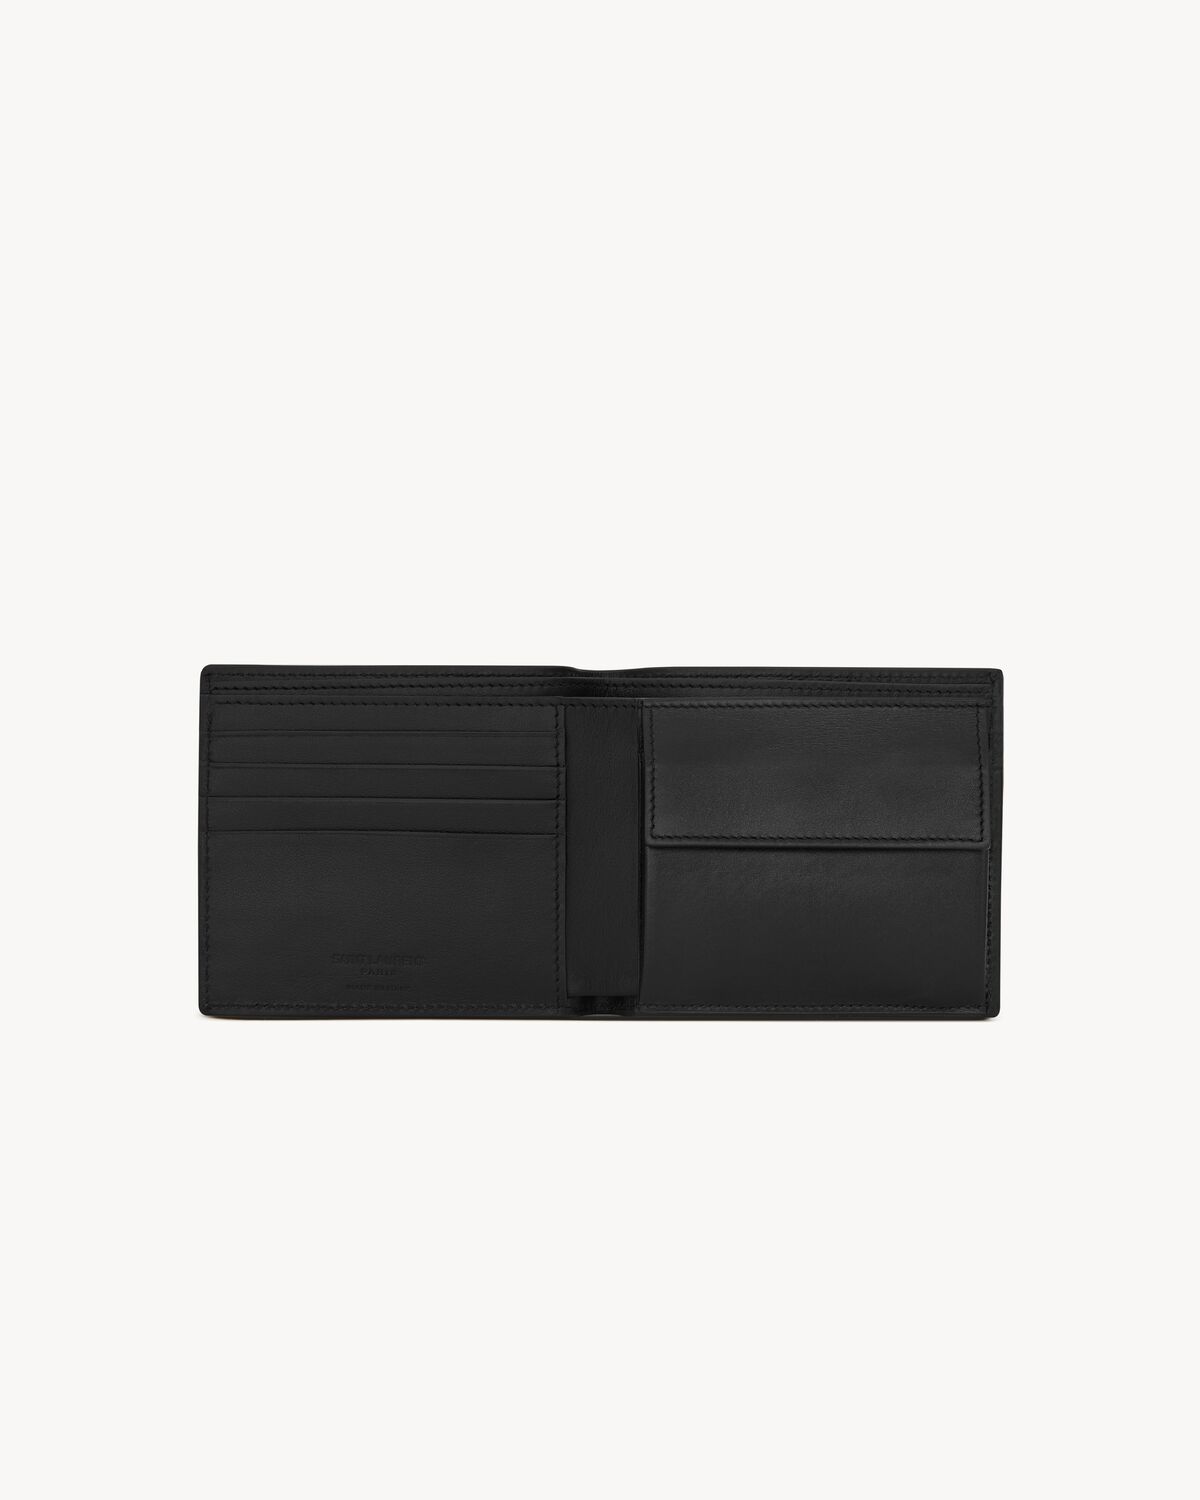 SAINT LAURENT PARIS East/West wallet with coin purse in smooth leather